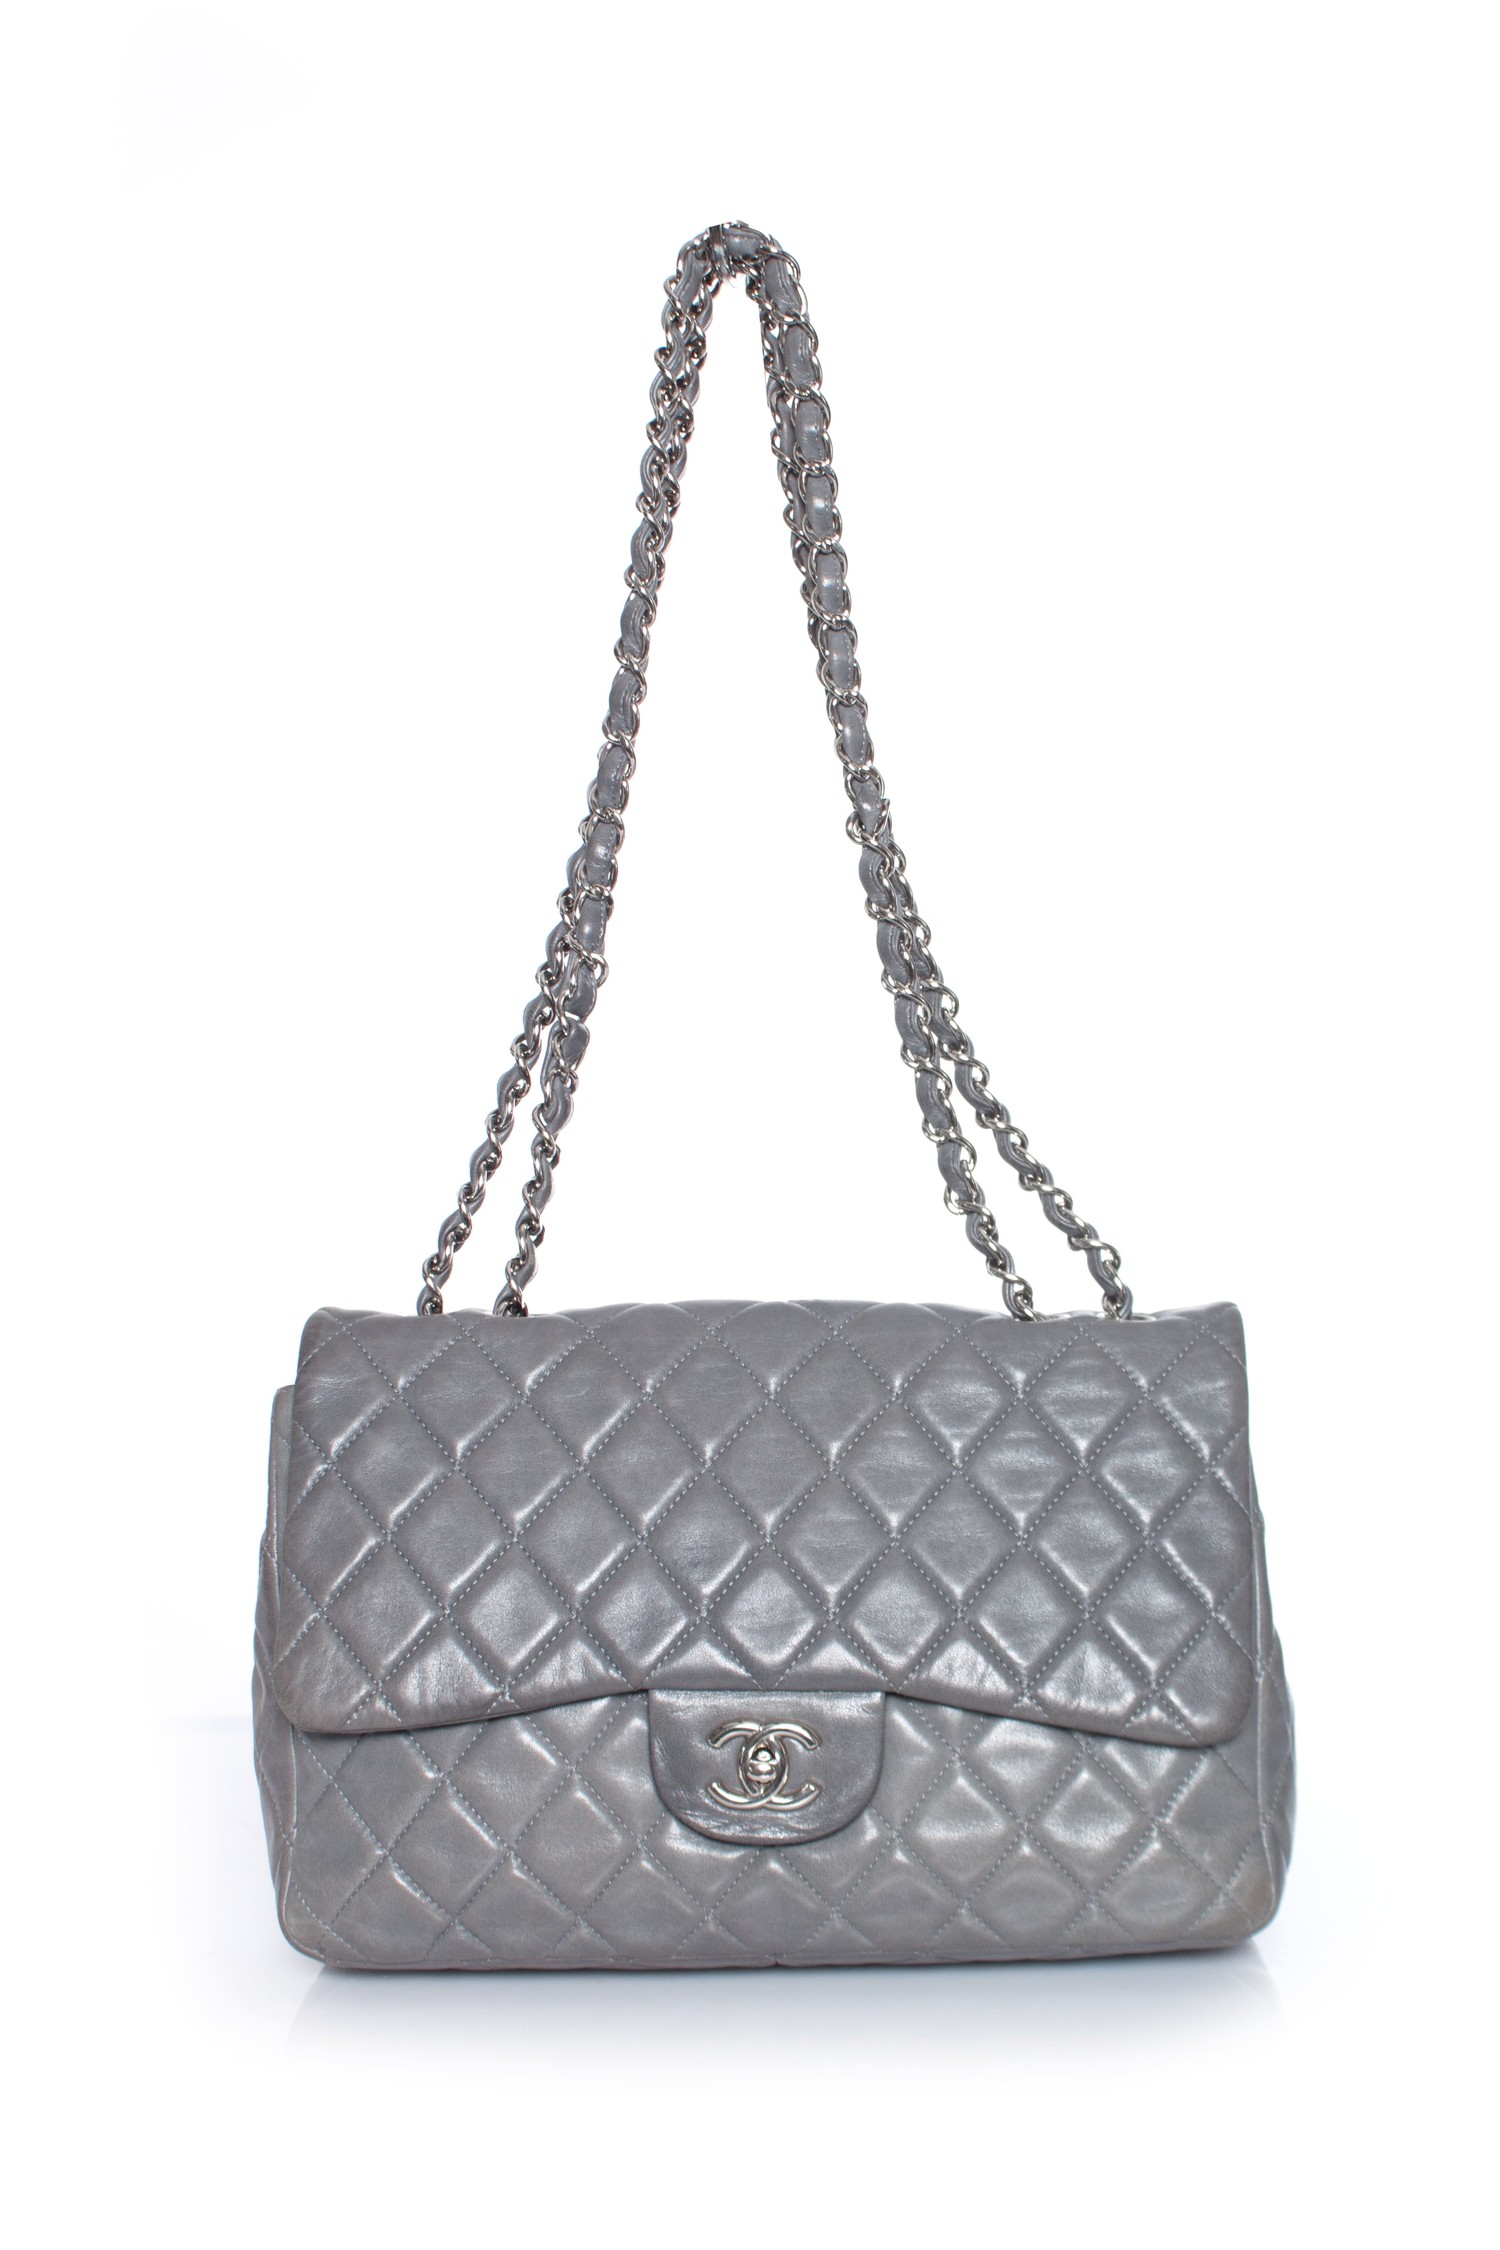 Chanel, Large classic flap bag with silver hardware in elephant